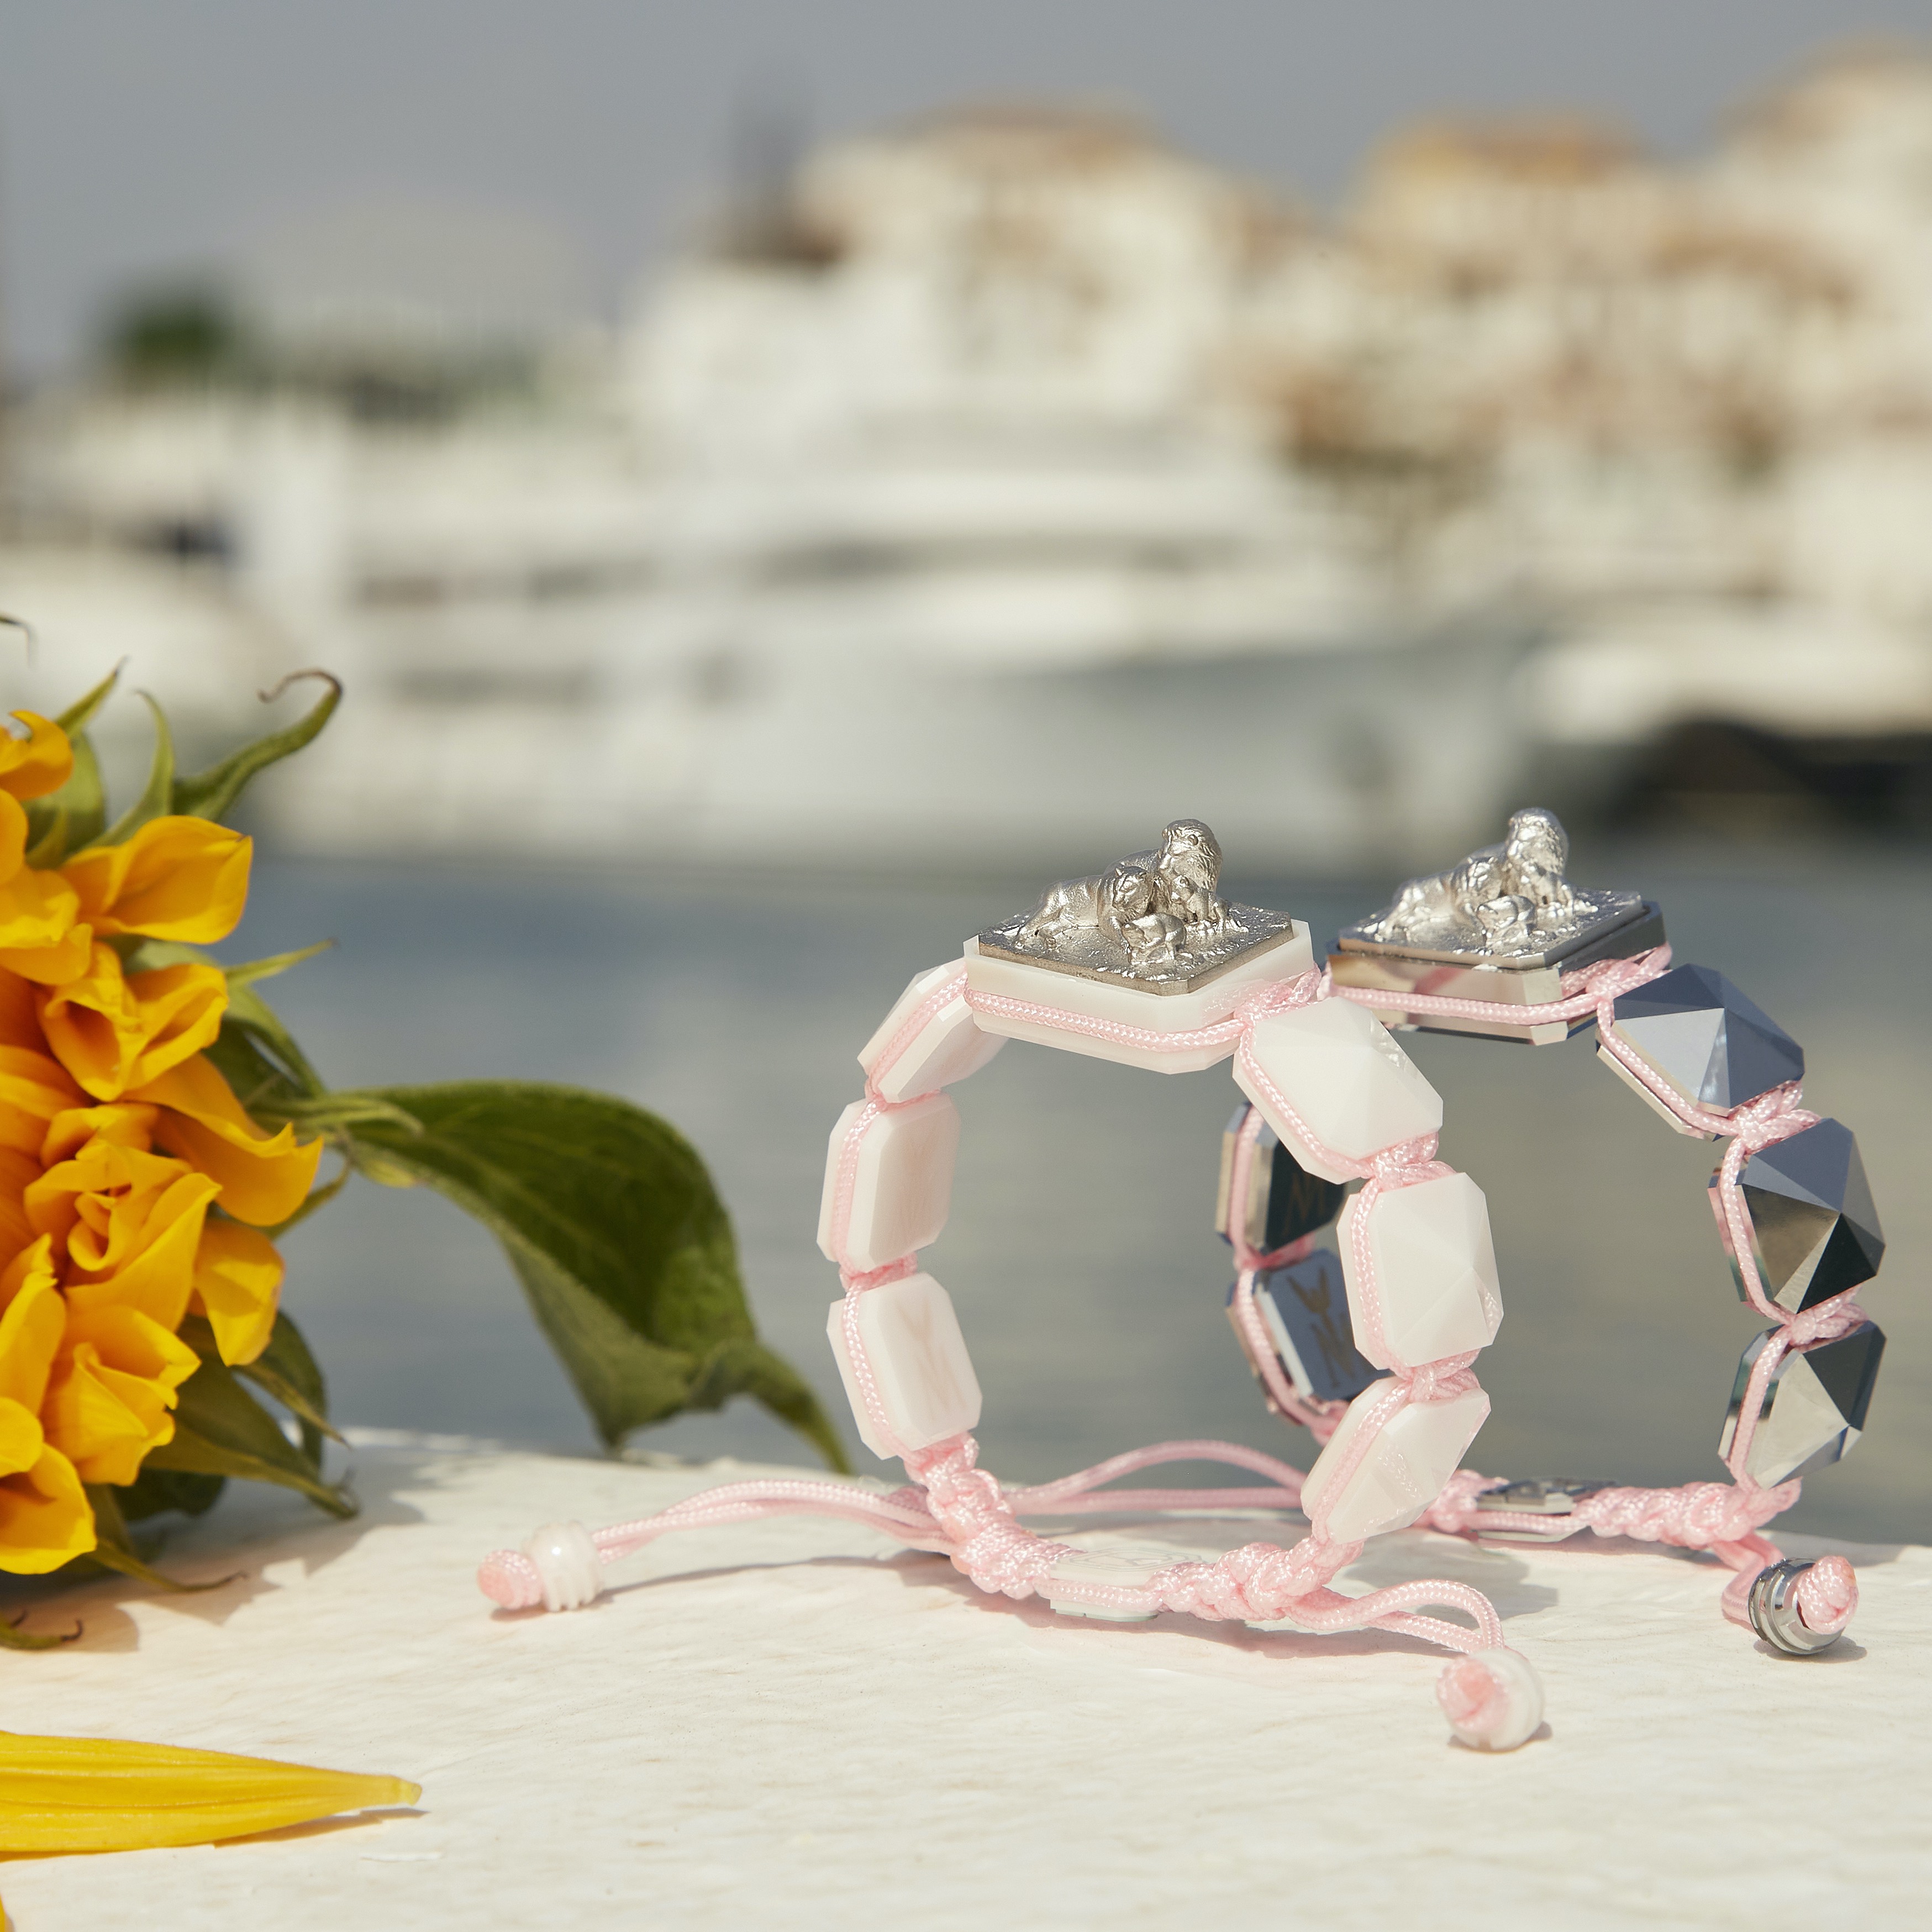 Proud Of You bracelet with ceramic and sculpture finished in a Platinum effect complemented with a pink coloured cord.